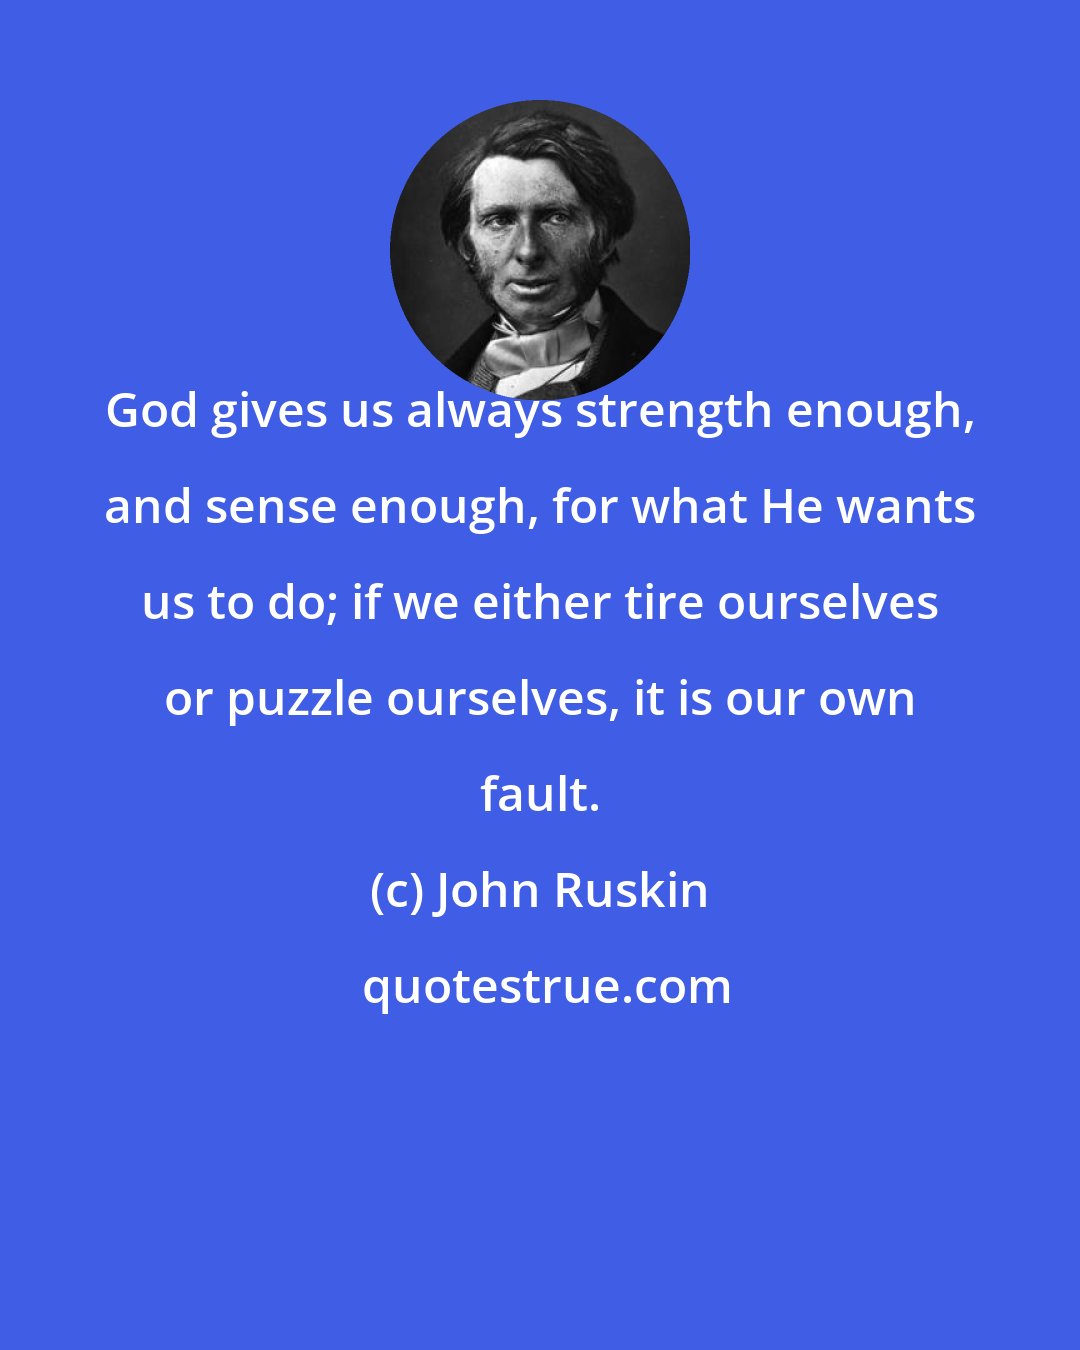 John Ruskin: God gives us always strength enough, and sense enough, for what He wants us to do; if we either tire ourselves or puzzle ourselves, it is our own fault.